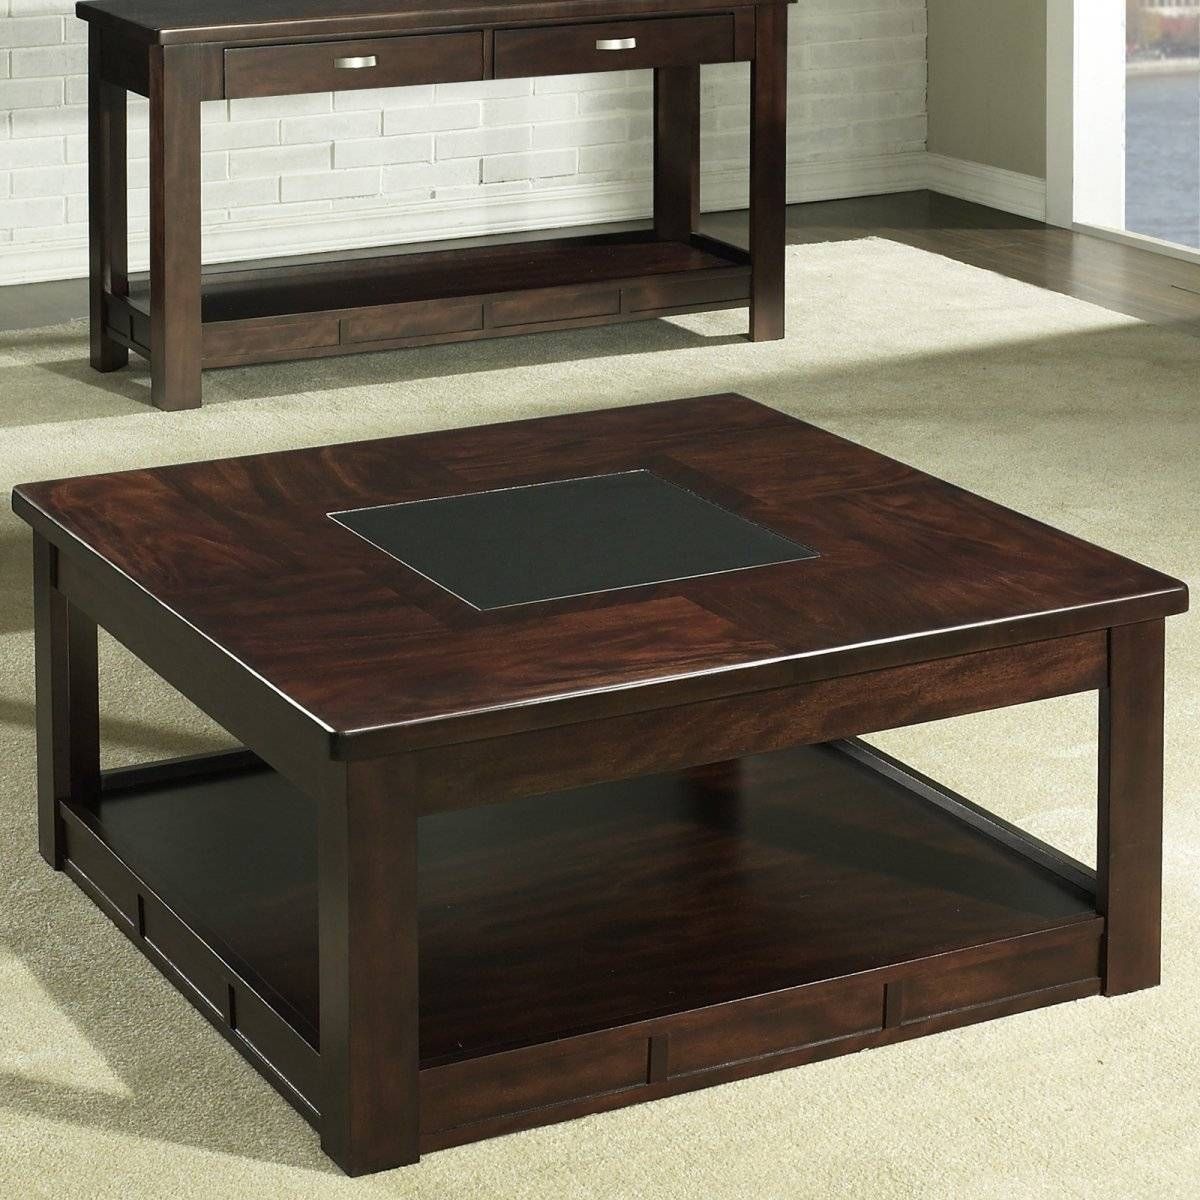 Square Wood Coffee Table With Drawers And Glass Top – Jericho Throughout Large Square Coffee Tables (View 6 of 30)